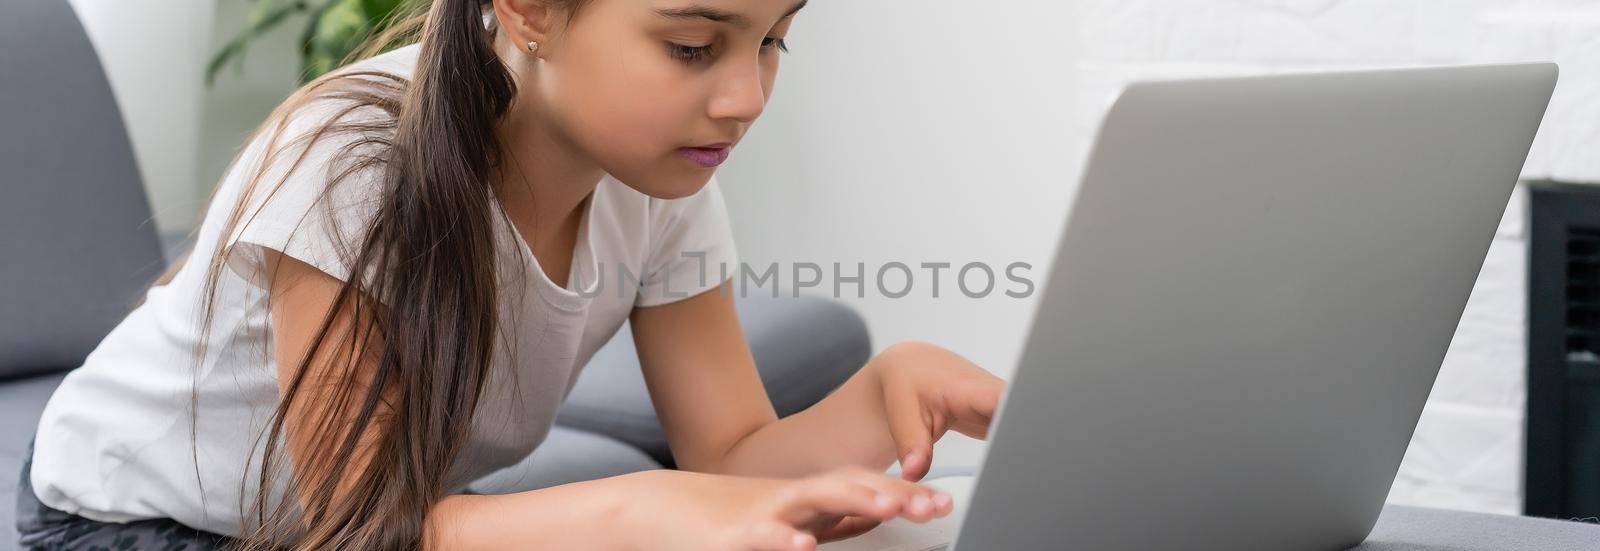 little girl studying with computer, little girl with laptop online